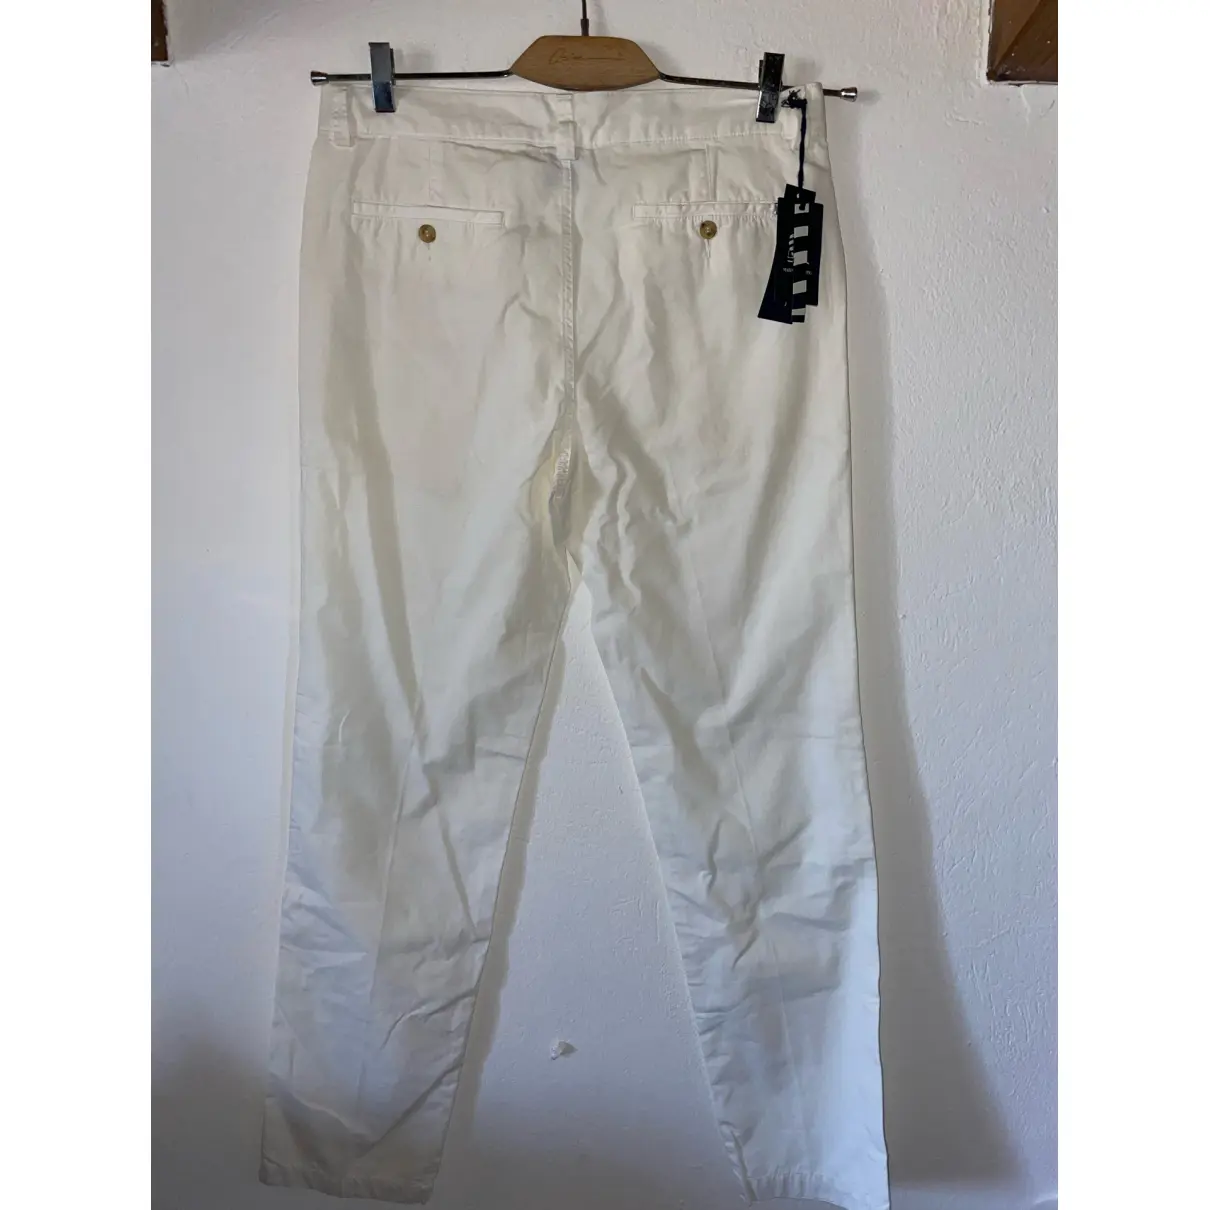 Buy Marina Yachting Trousers online